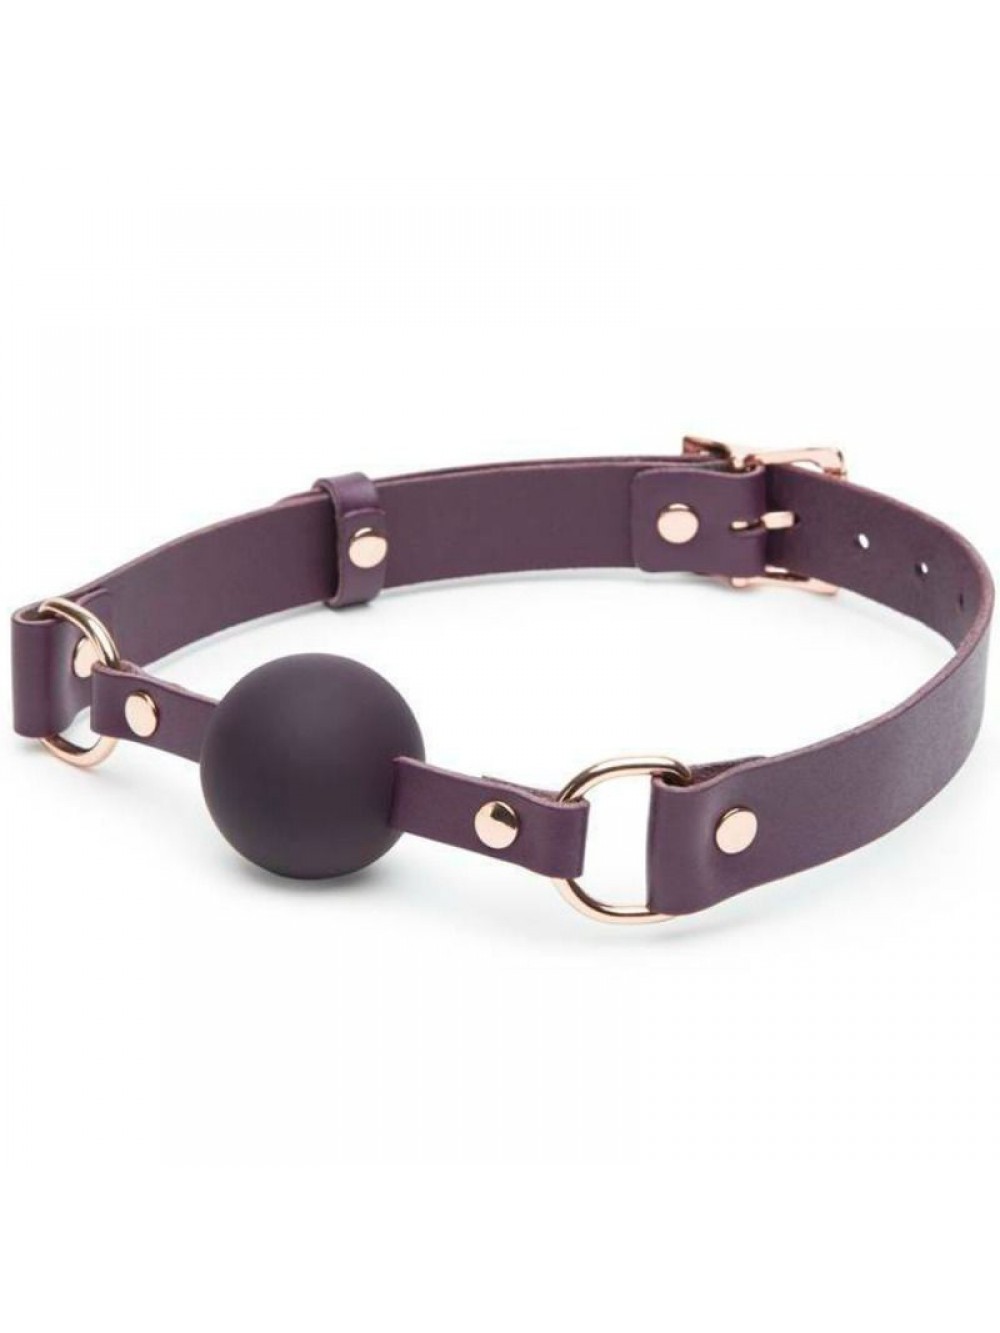 FIFTY SHADES FREED LEATHER BALL GAG 5060493003556